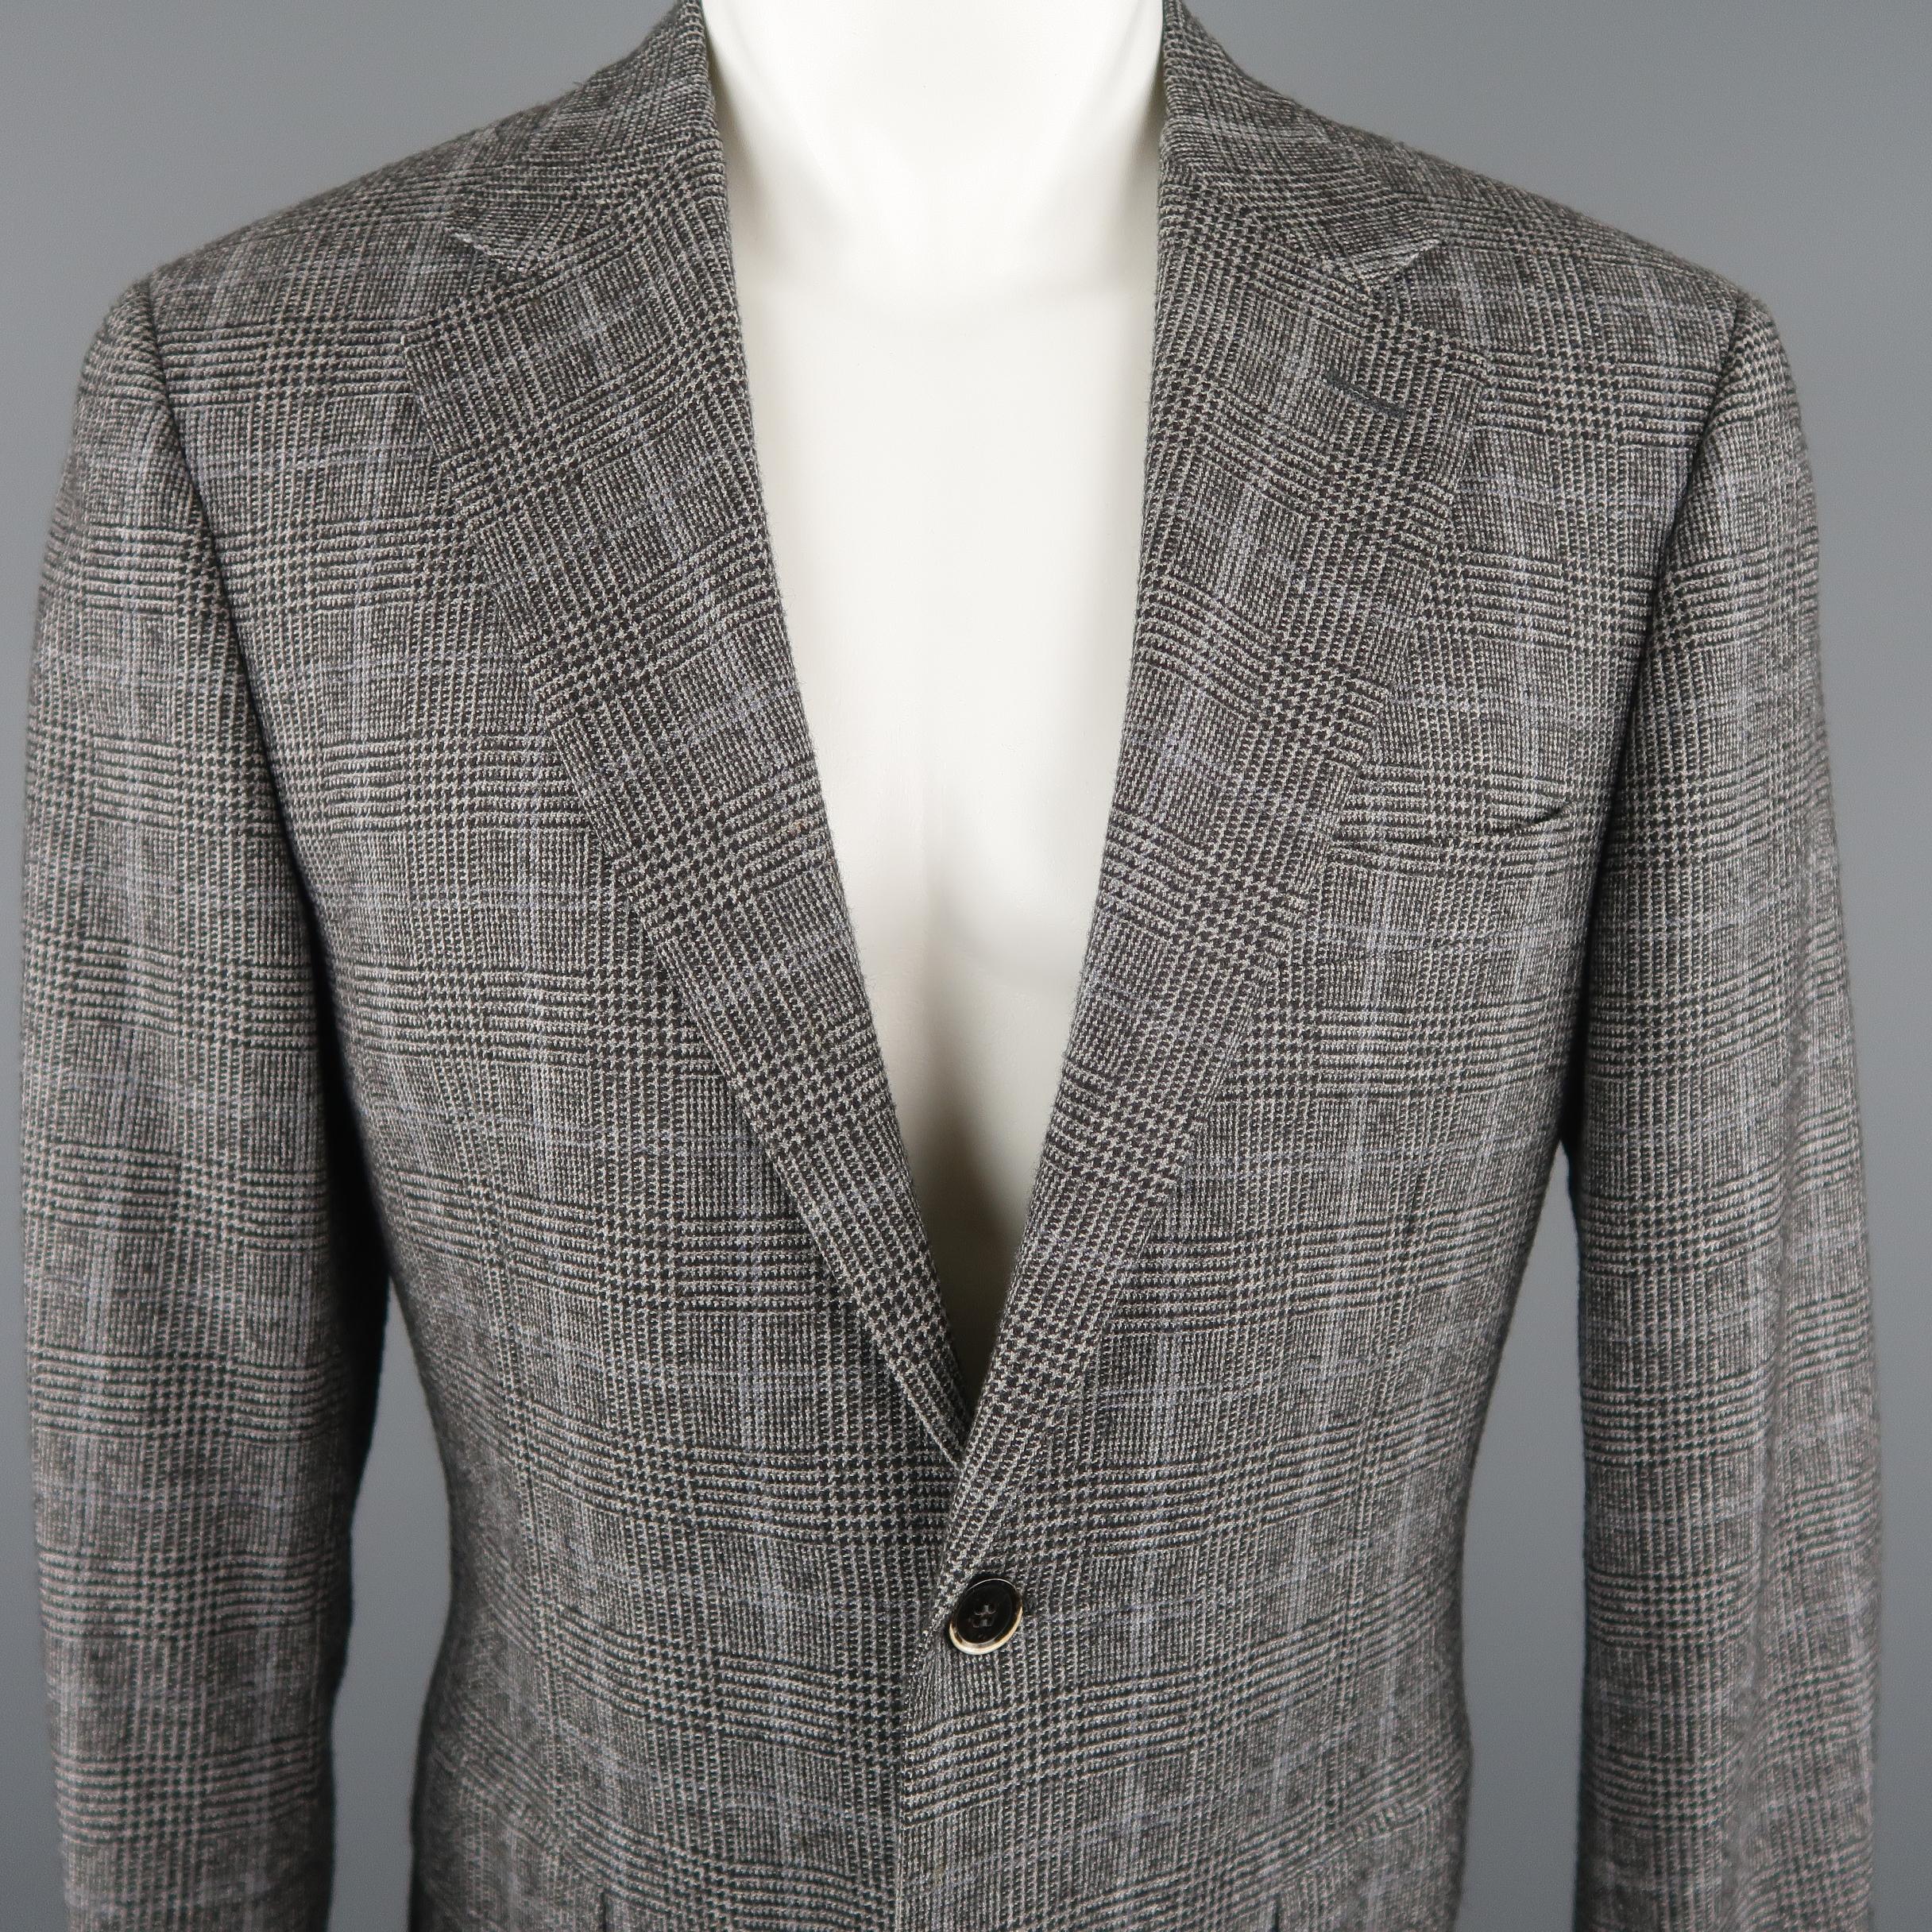 CANALI  blazer comes in black and grey tones in a glenplaid wool / cotton material, featuring a notch lapel, slit and flap pockets, 2 buttons closure, single breasted. Made in Italy.
 
Excellent Pre-Owned Condition.
Marked: 50R IT
 
Measurements:
